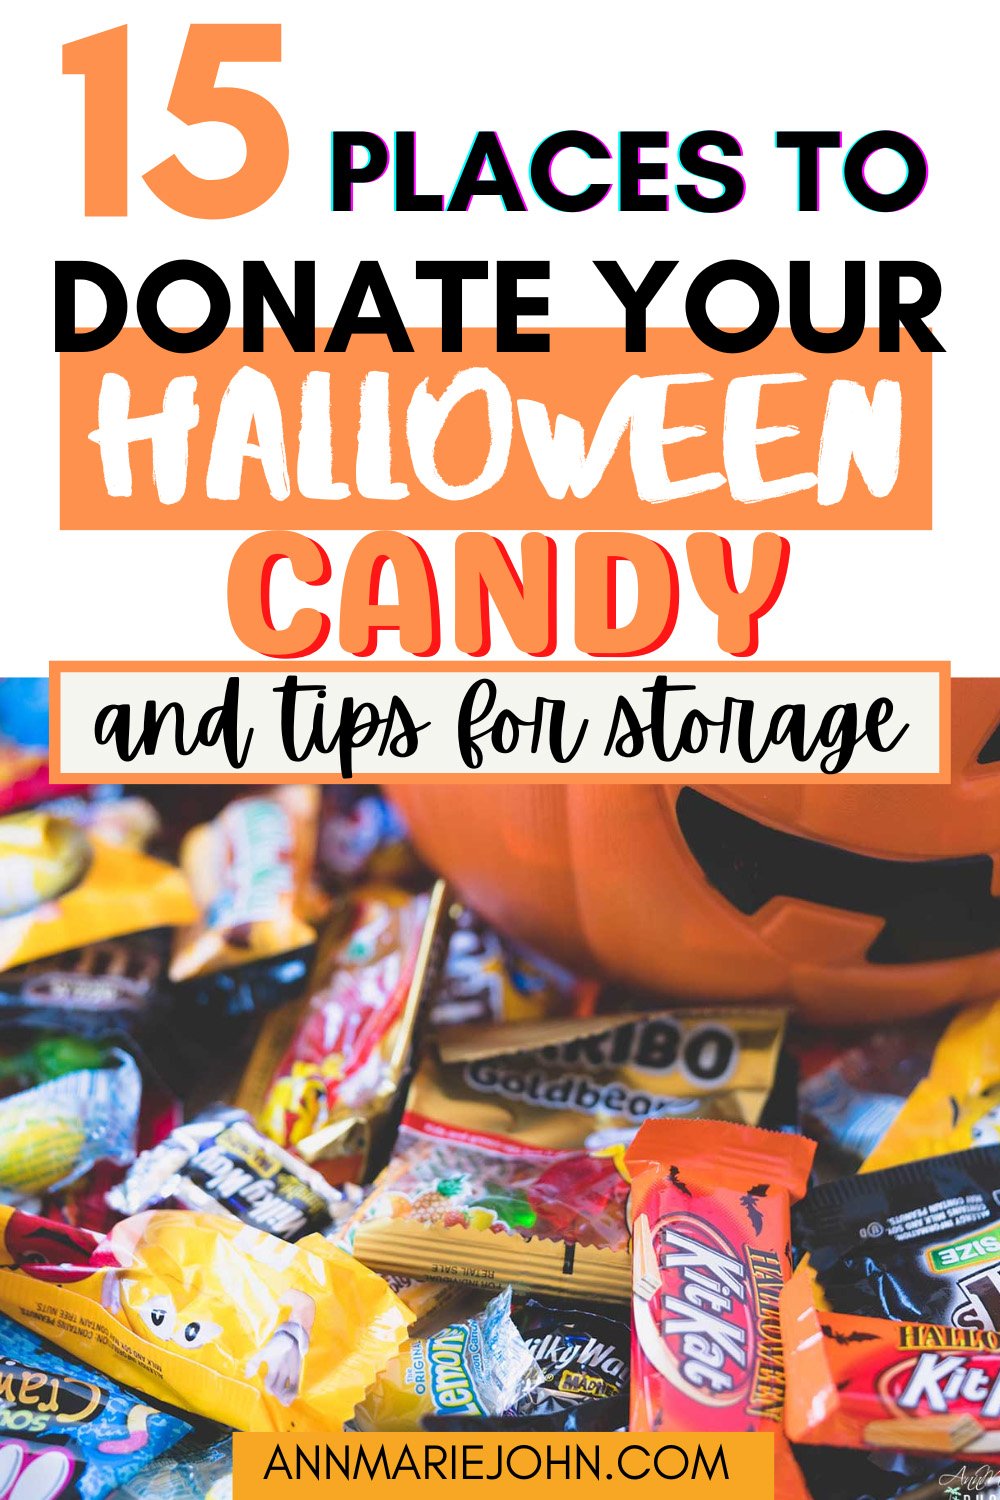 Places to Donate Your Halloween Candy & Tips for Storage 🎃 AnnMarie John